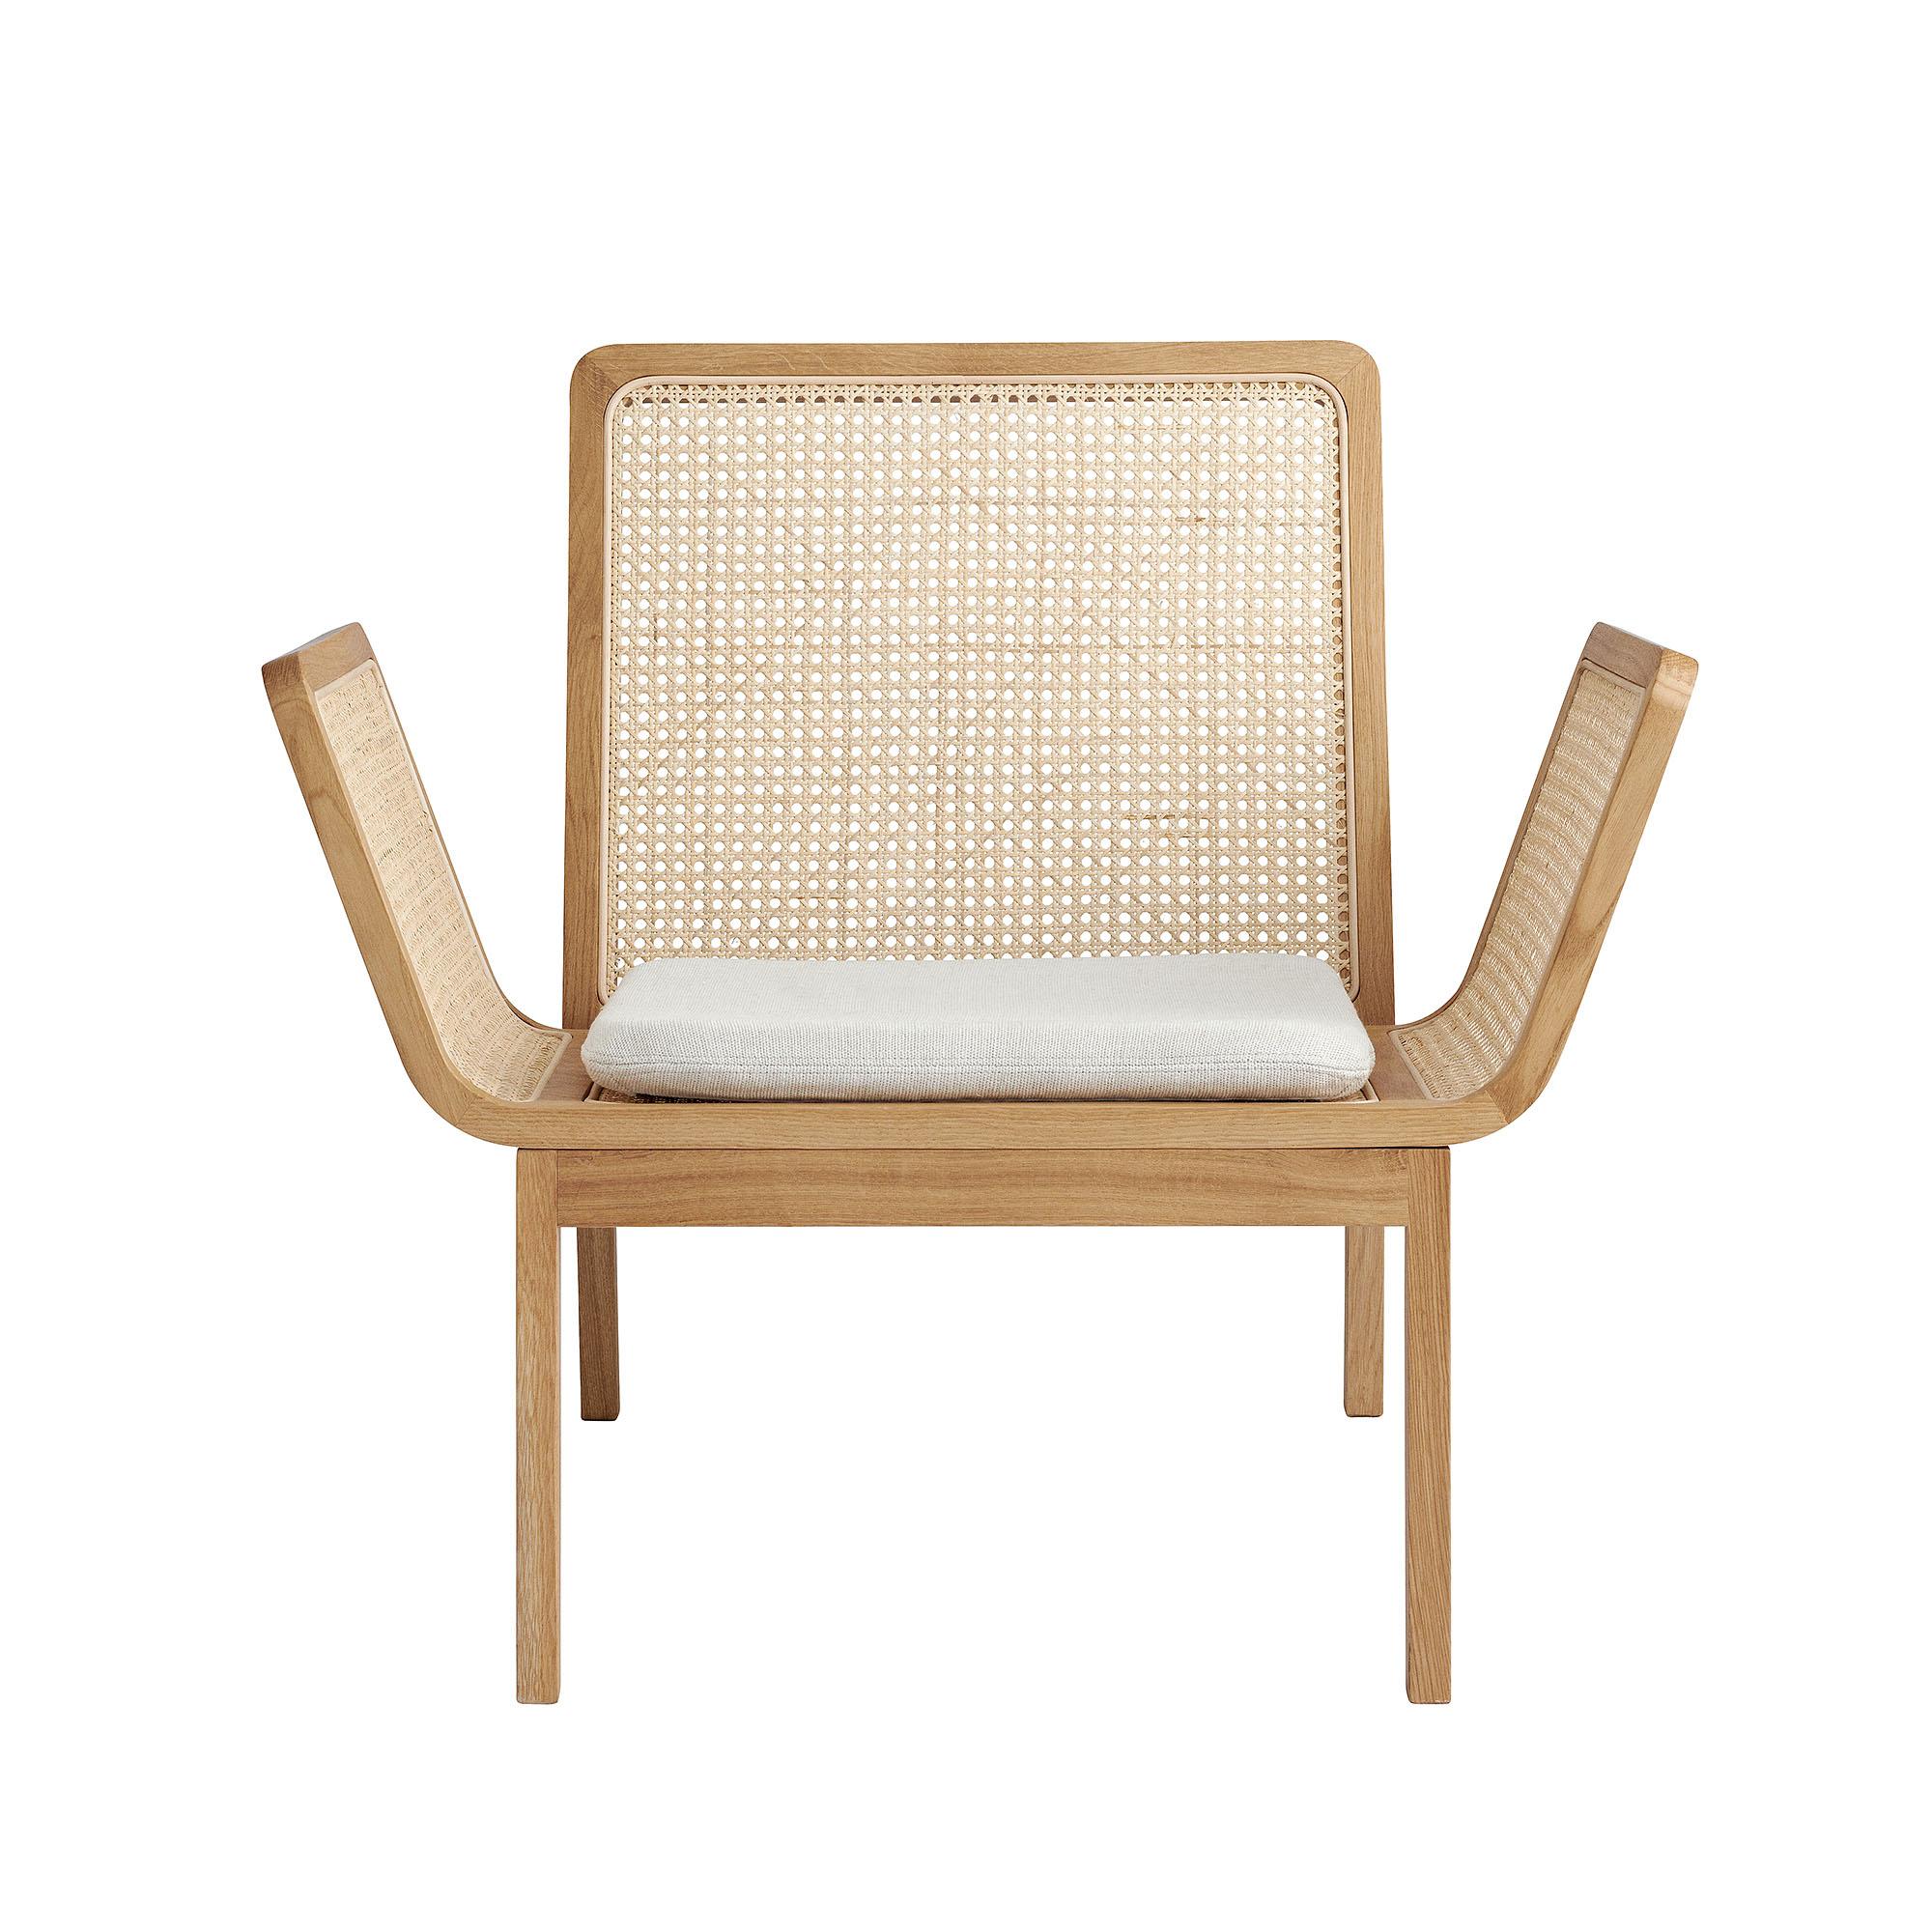 LE ROI CHAIR
by Kristian Sofus Hansen & Tommy Hyldahl

Lounge chair made of solid oak. Natural or Smoked finish.
Cushion at additional cost: linen or leather.

Le Roi Lounge Chair is made from solid oak with inlaid French rattan. The collection is a